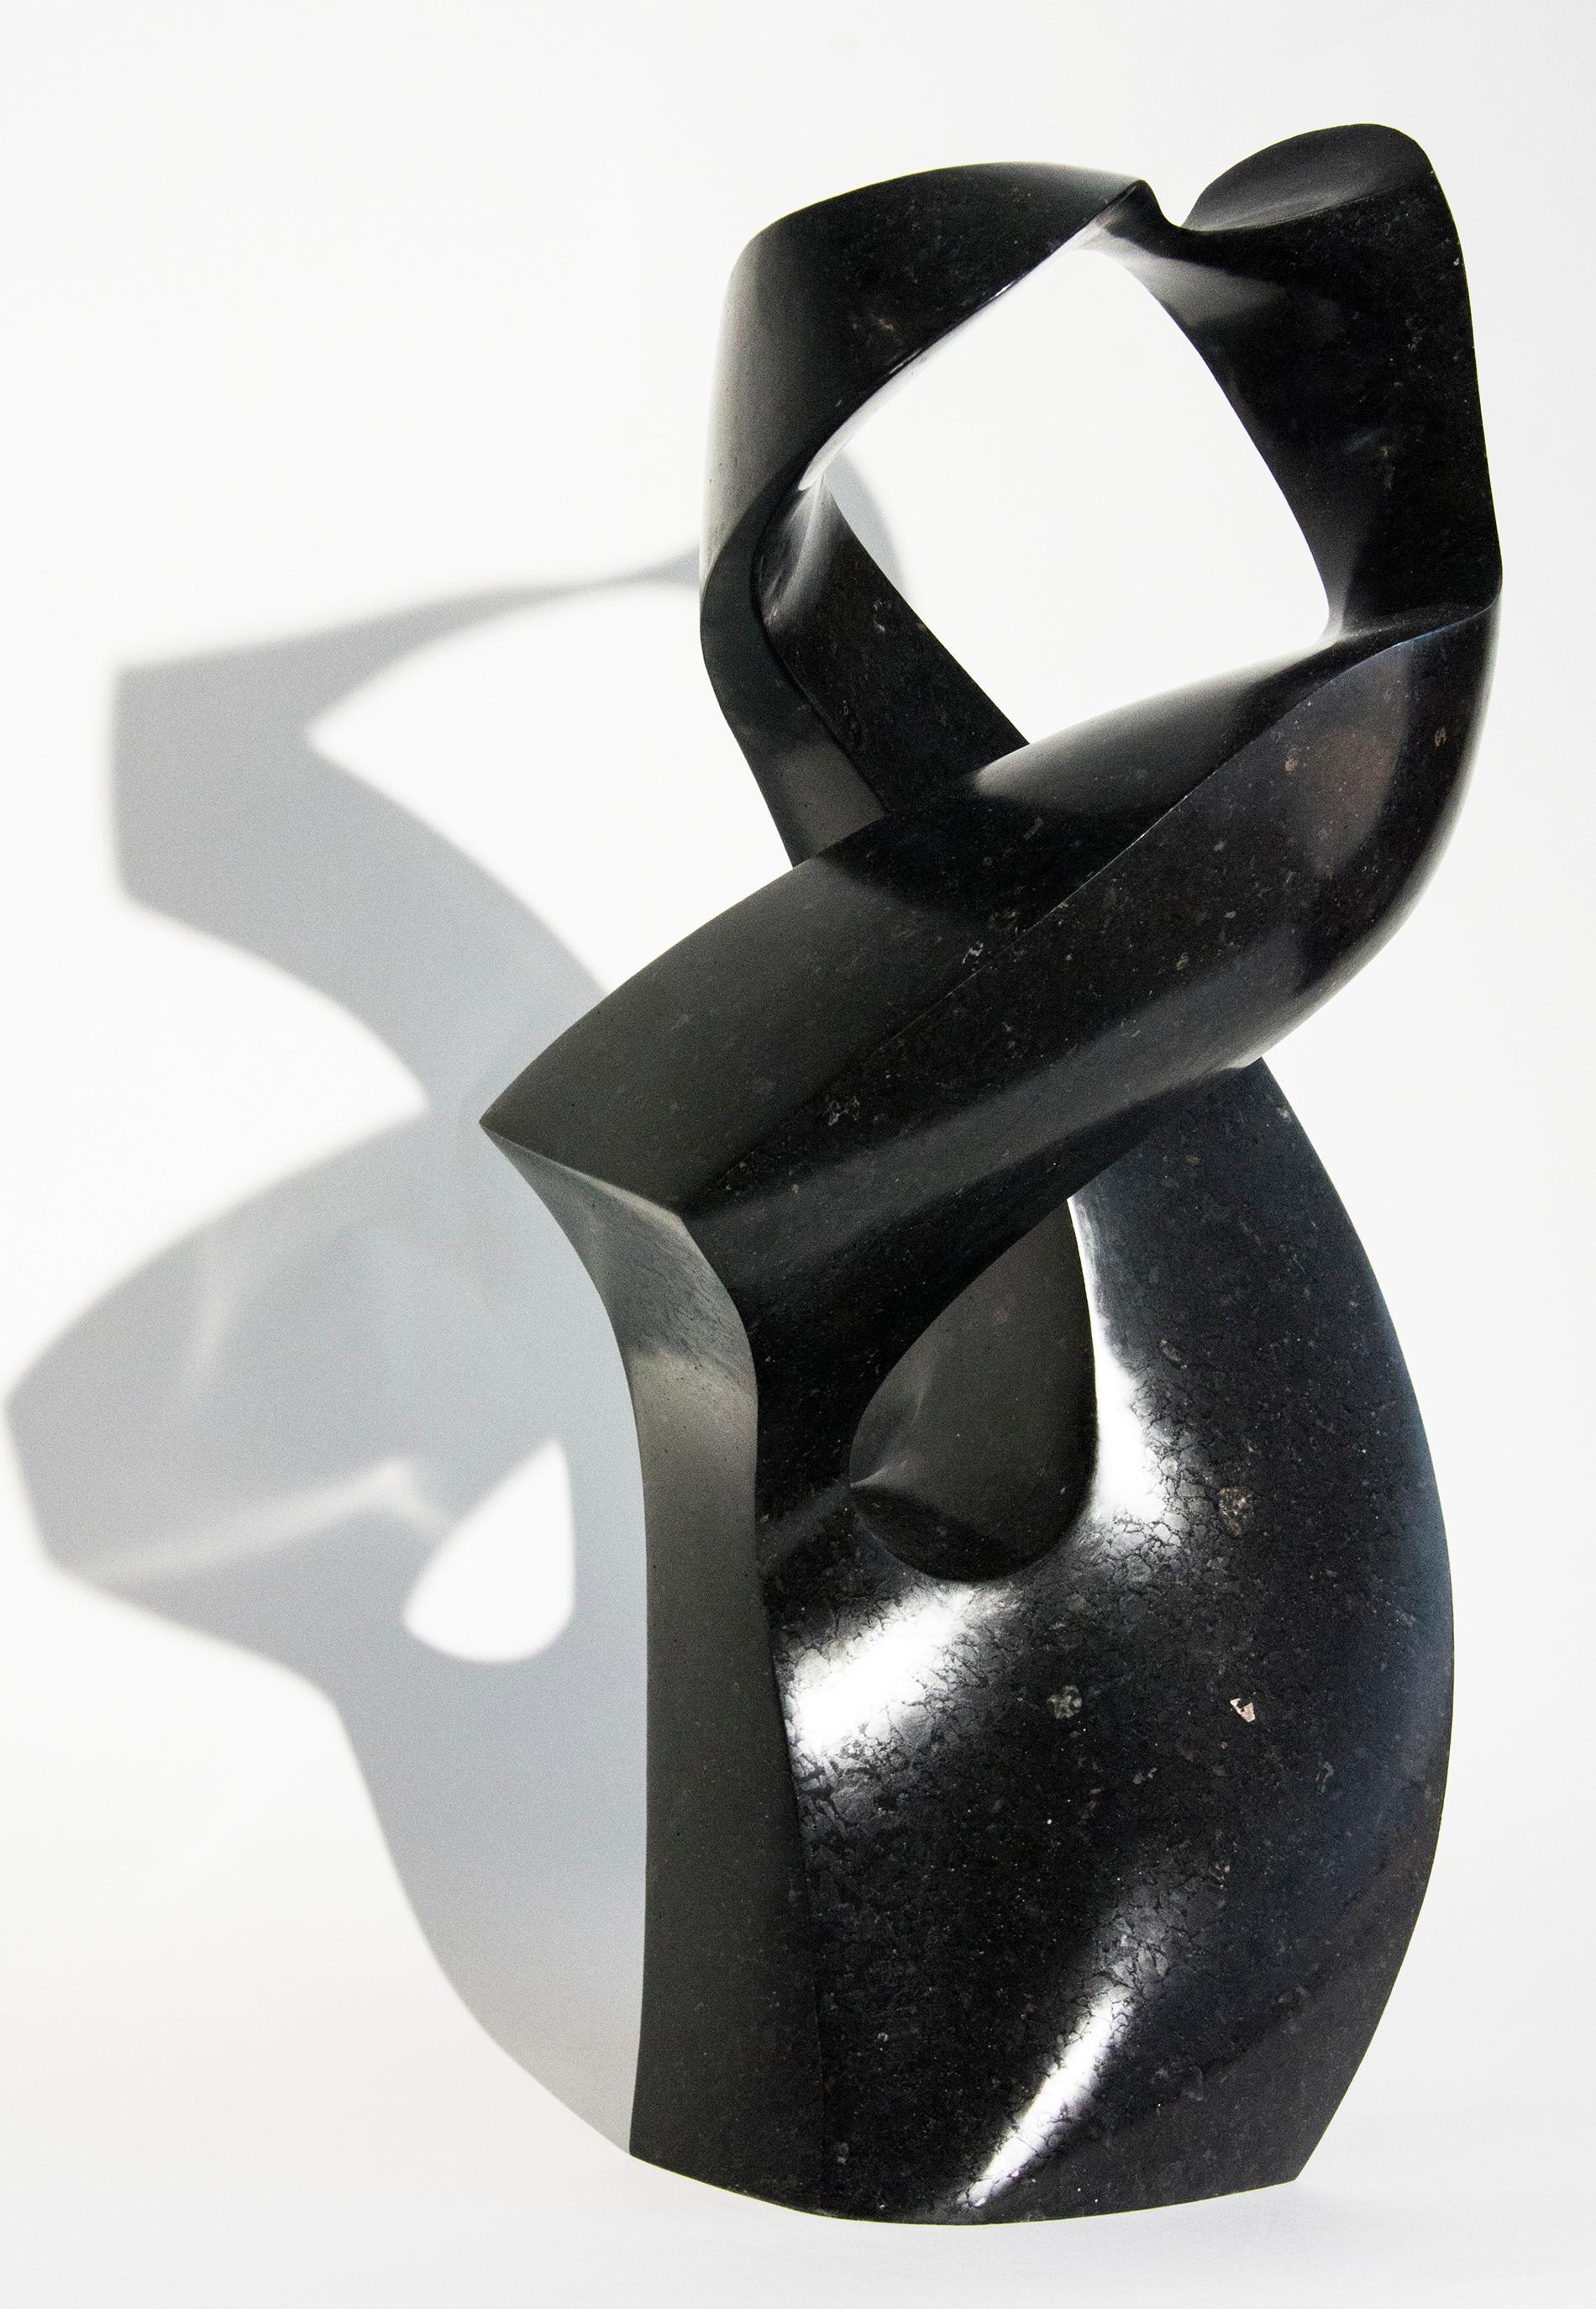 Embrace 3/50 - dark, smooth, polished, abstract, black granite sculpture 2